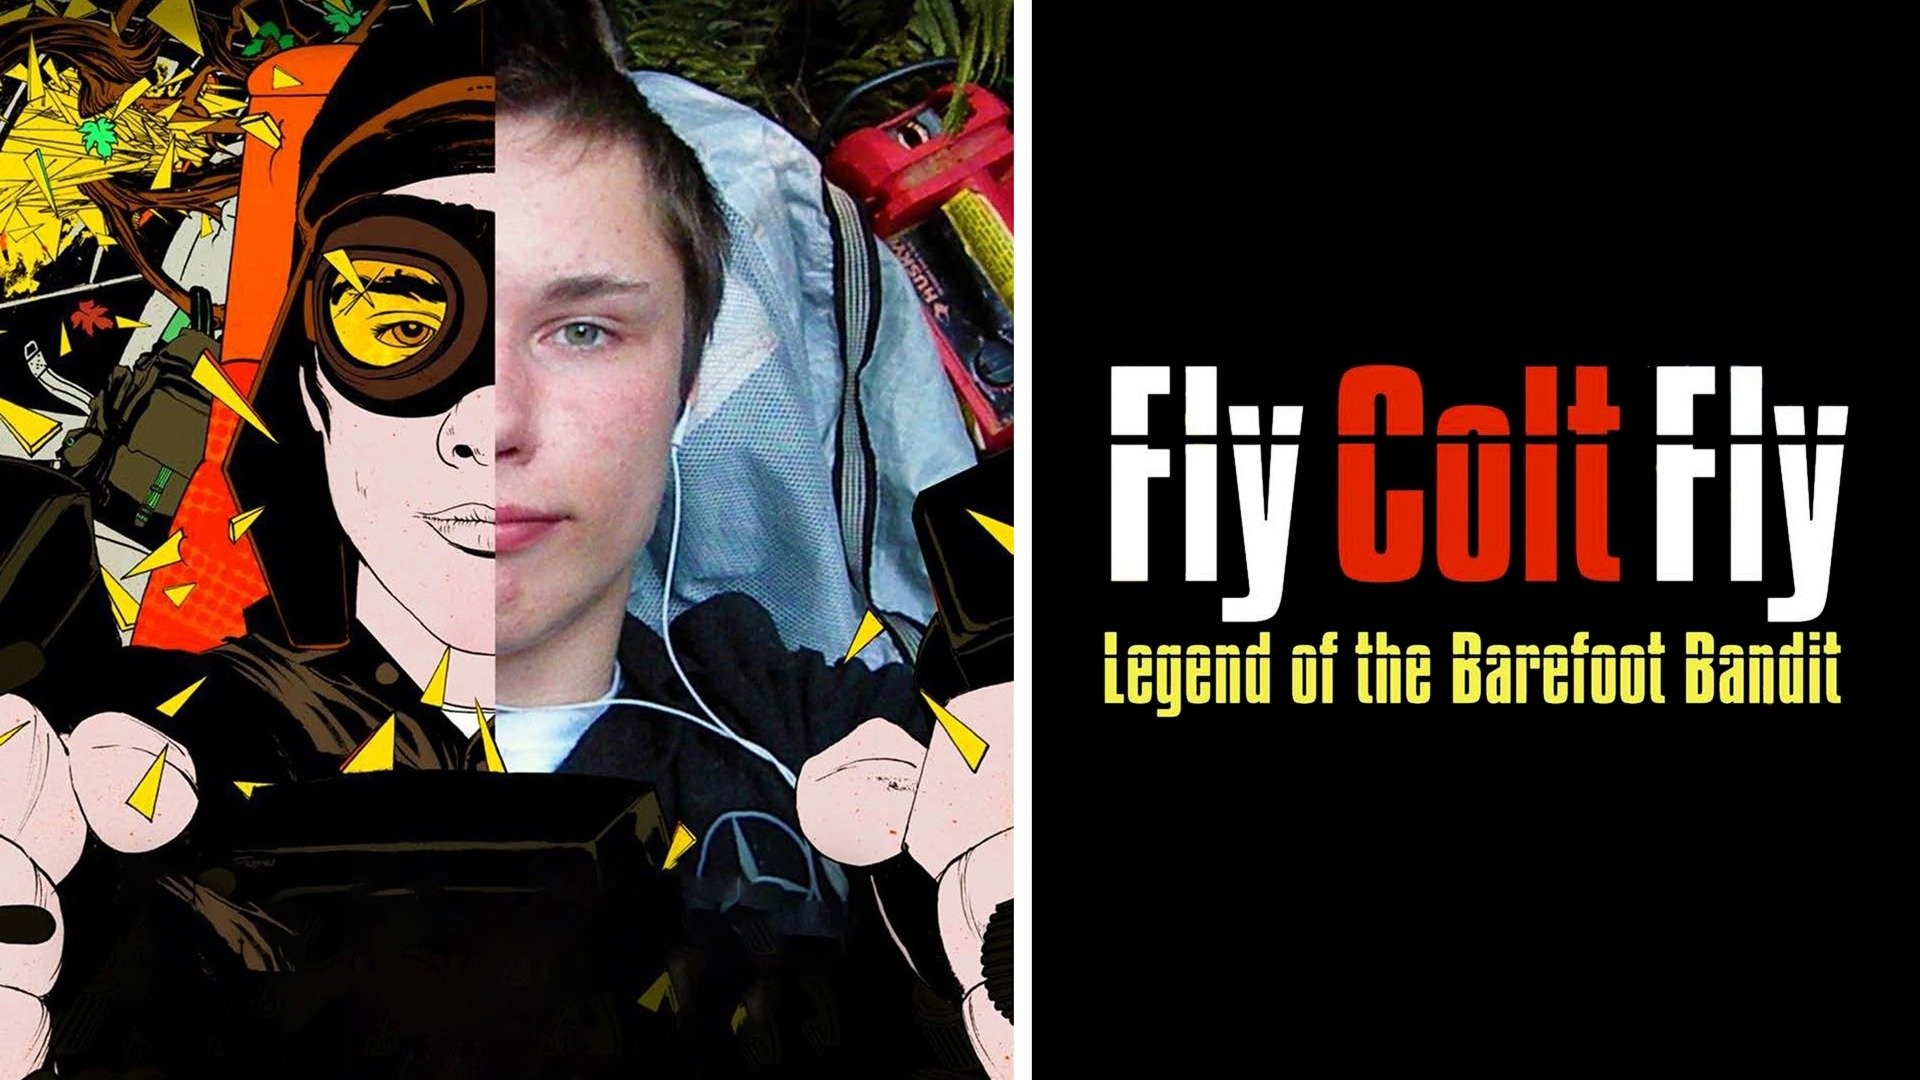 FLY COLT FLY, (aka FLY COLT FLY - LEGEND OF THE BAREFOOT BANDIT